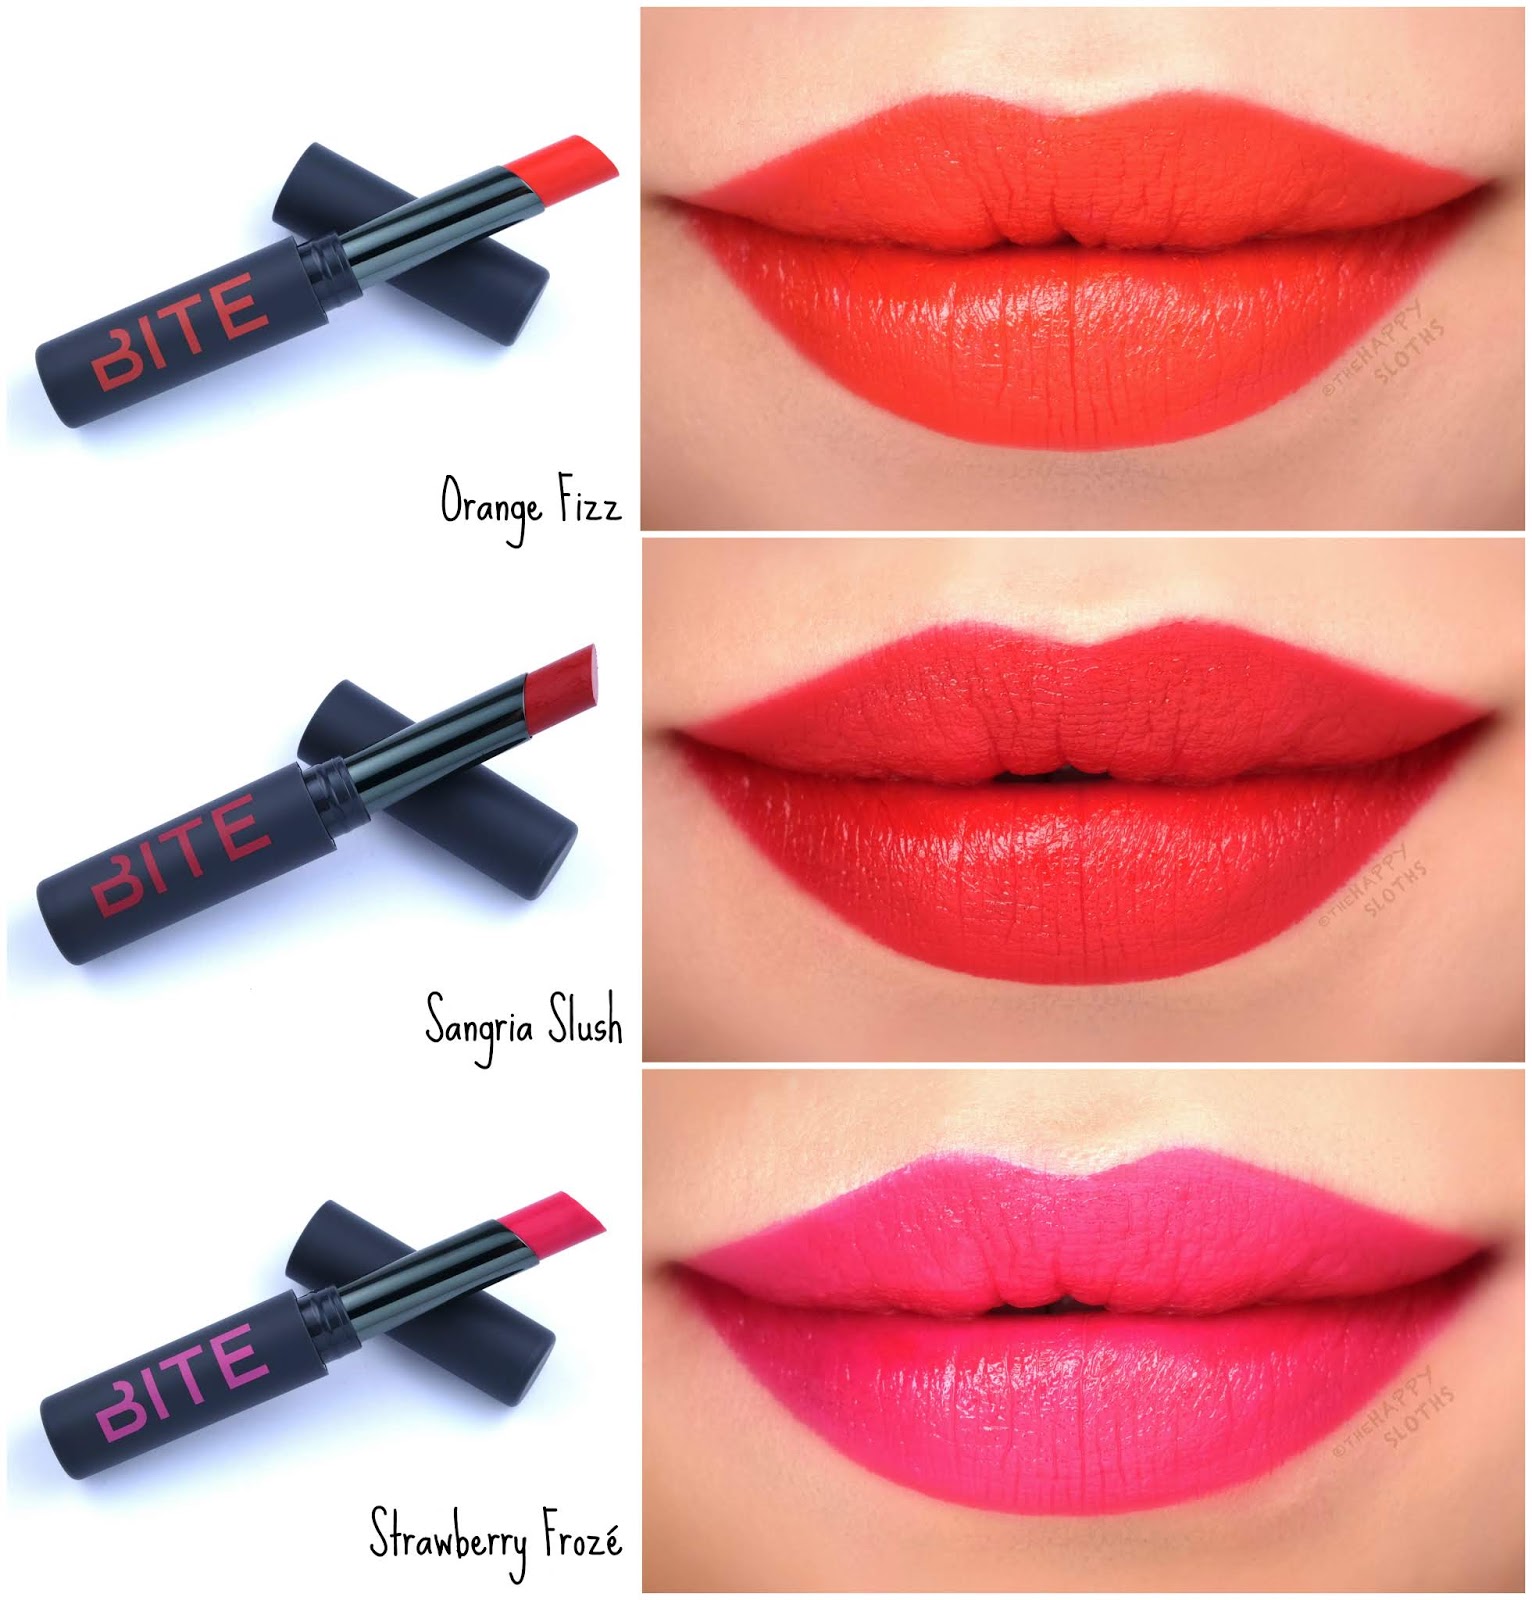 Bite Beauty Outburst Longwear Lip Stain: Review and Swatches.